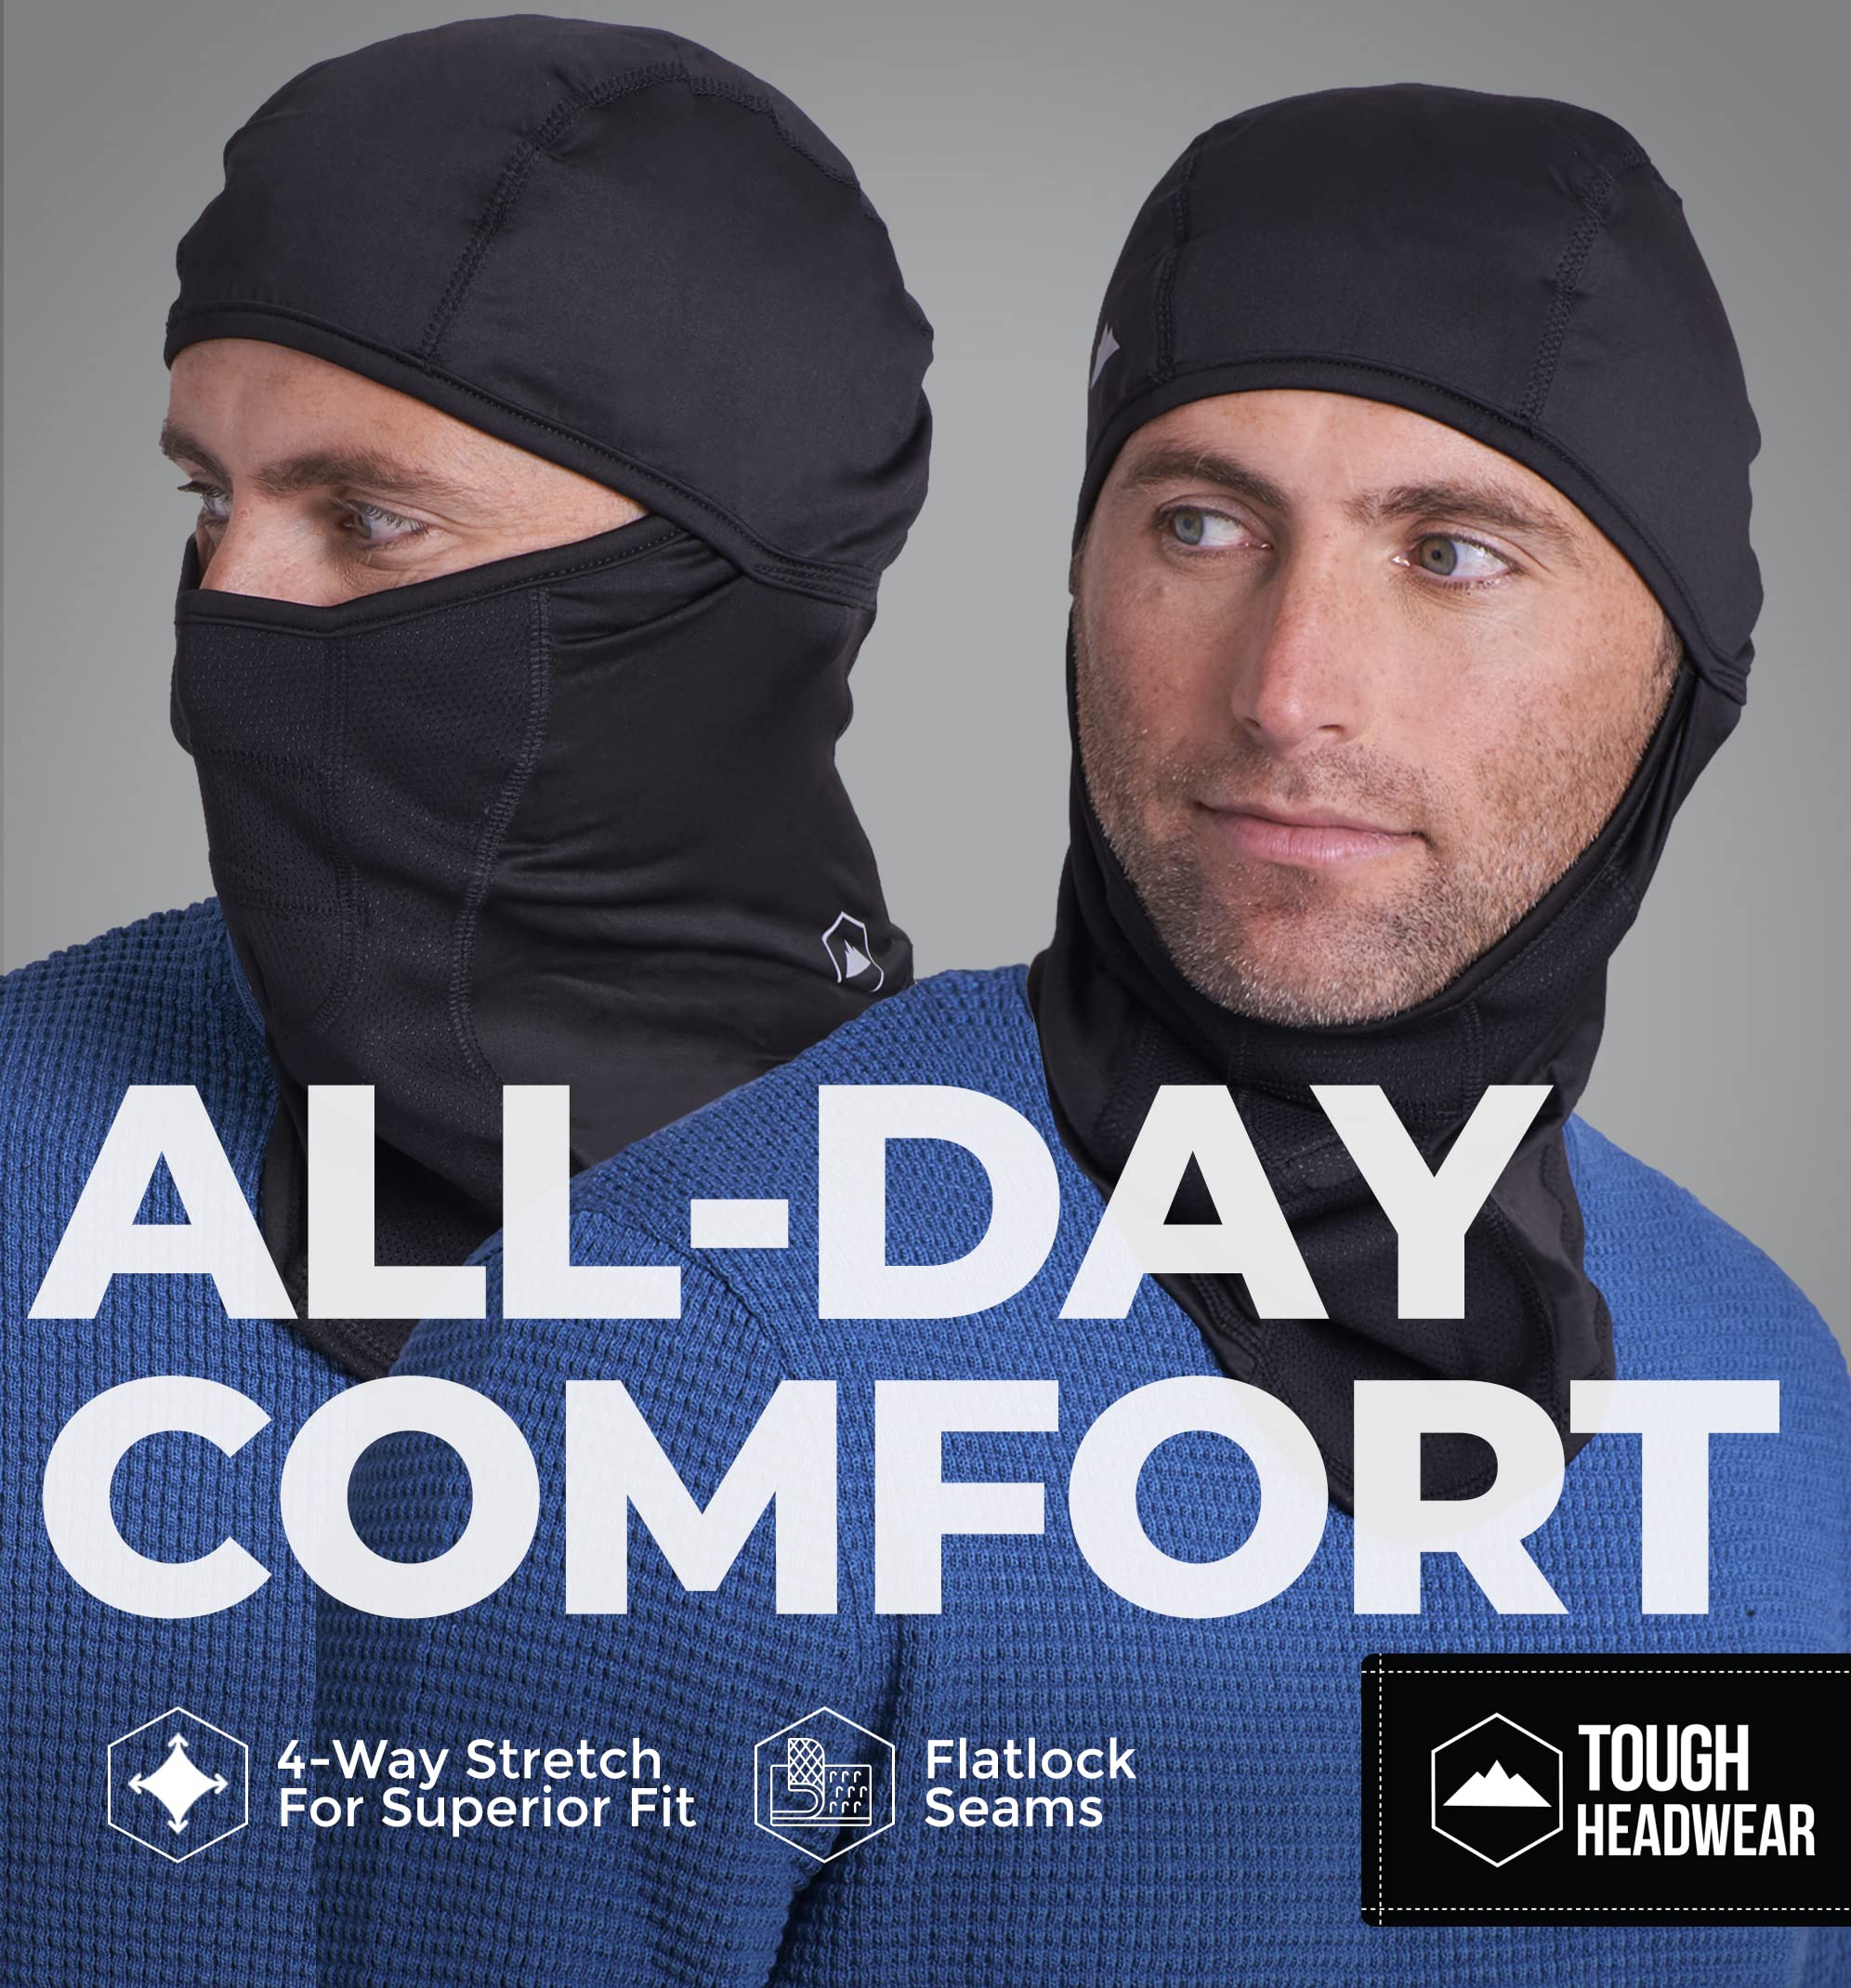 Balaclava Ski Mask - Winter Face Mask for Men & Women - Cold Weather Gear for Skiing, Snowboarding & Motorcycle Riding